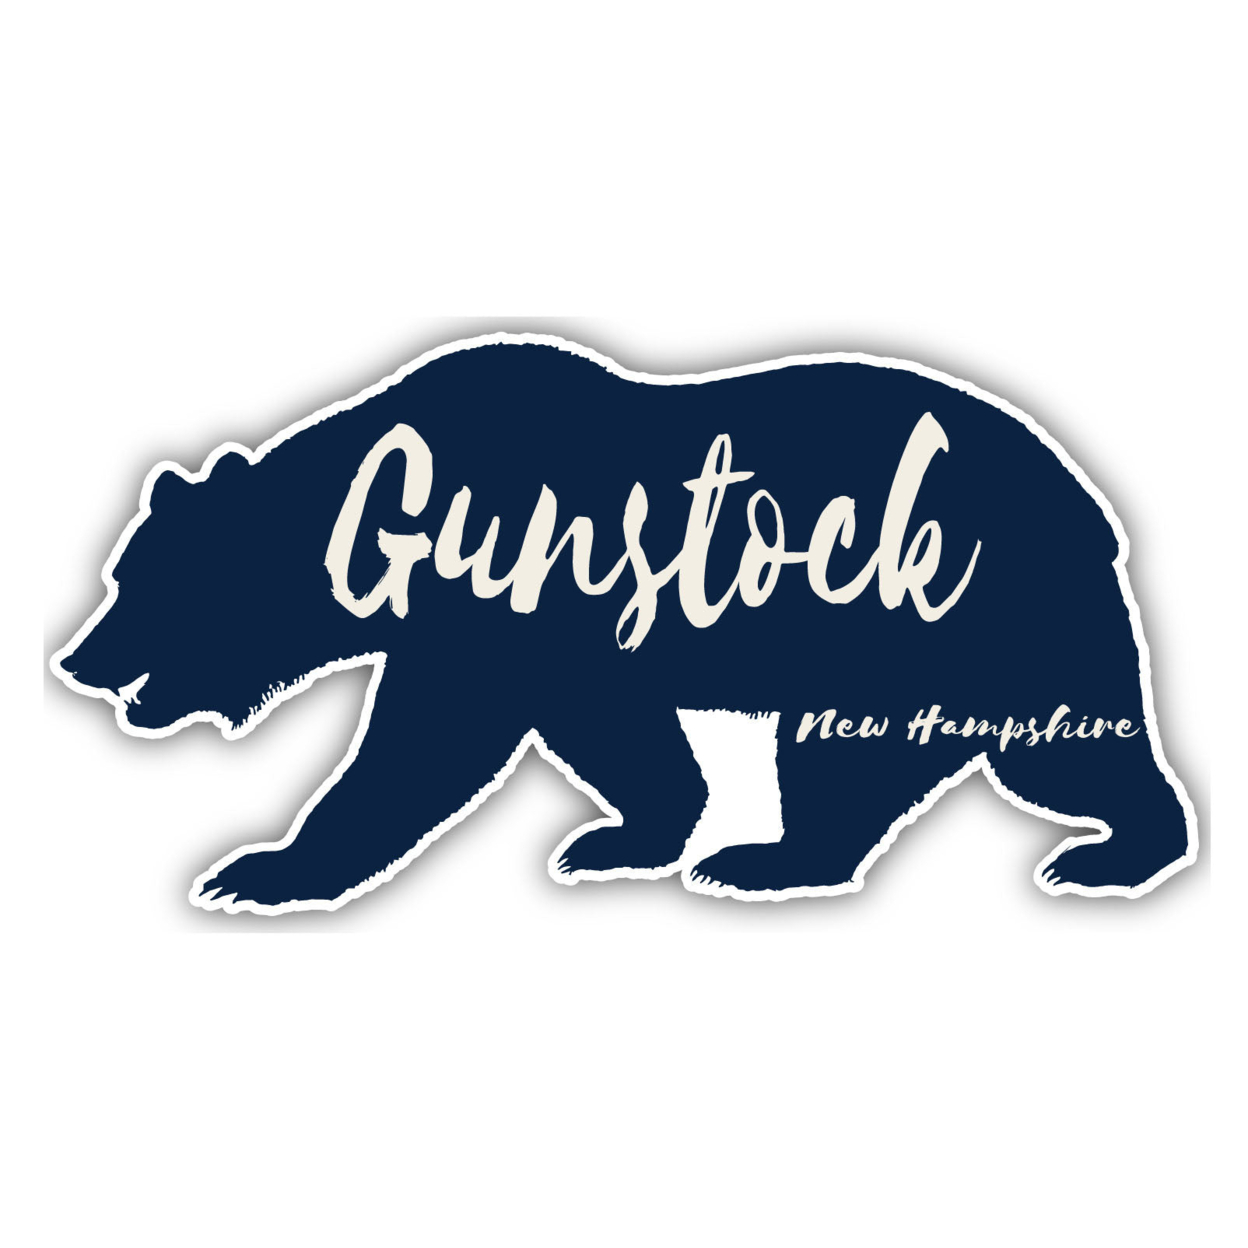 Gunstock New Hampshire Souvenir Decorative Stickers (Choose Theme And Size) - 4-Pack, 12-Inch, Bear